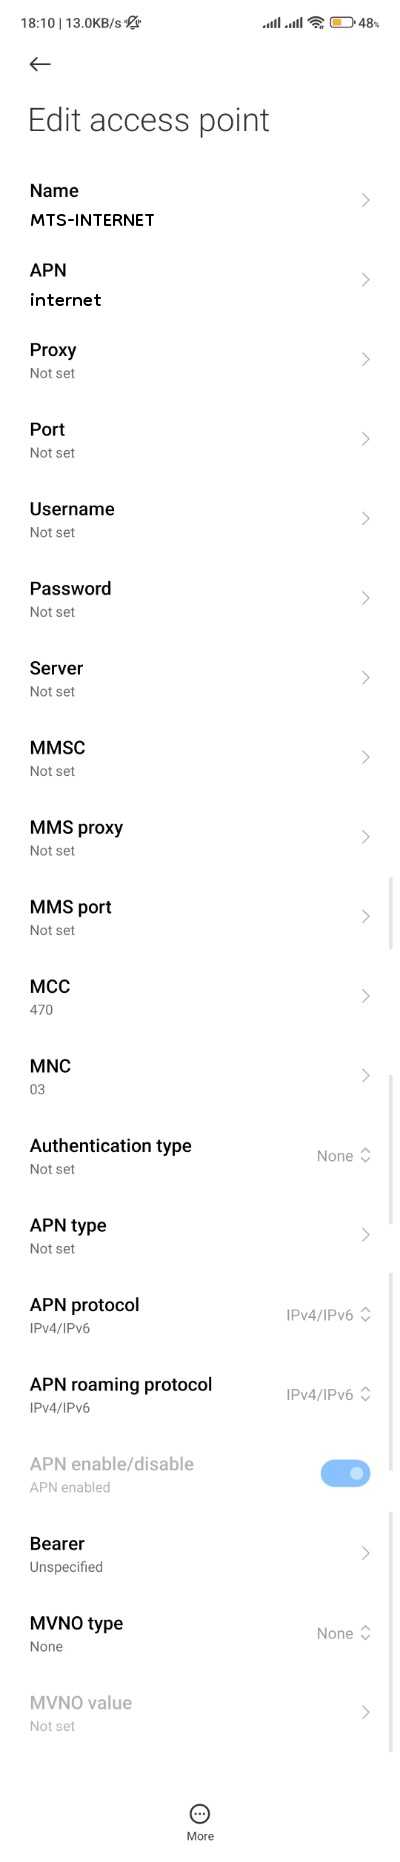 MTS Russia APN Setiings for Android iPhone 3G 4G Internet